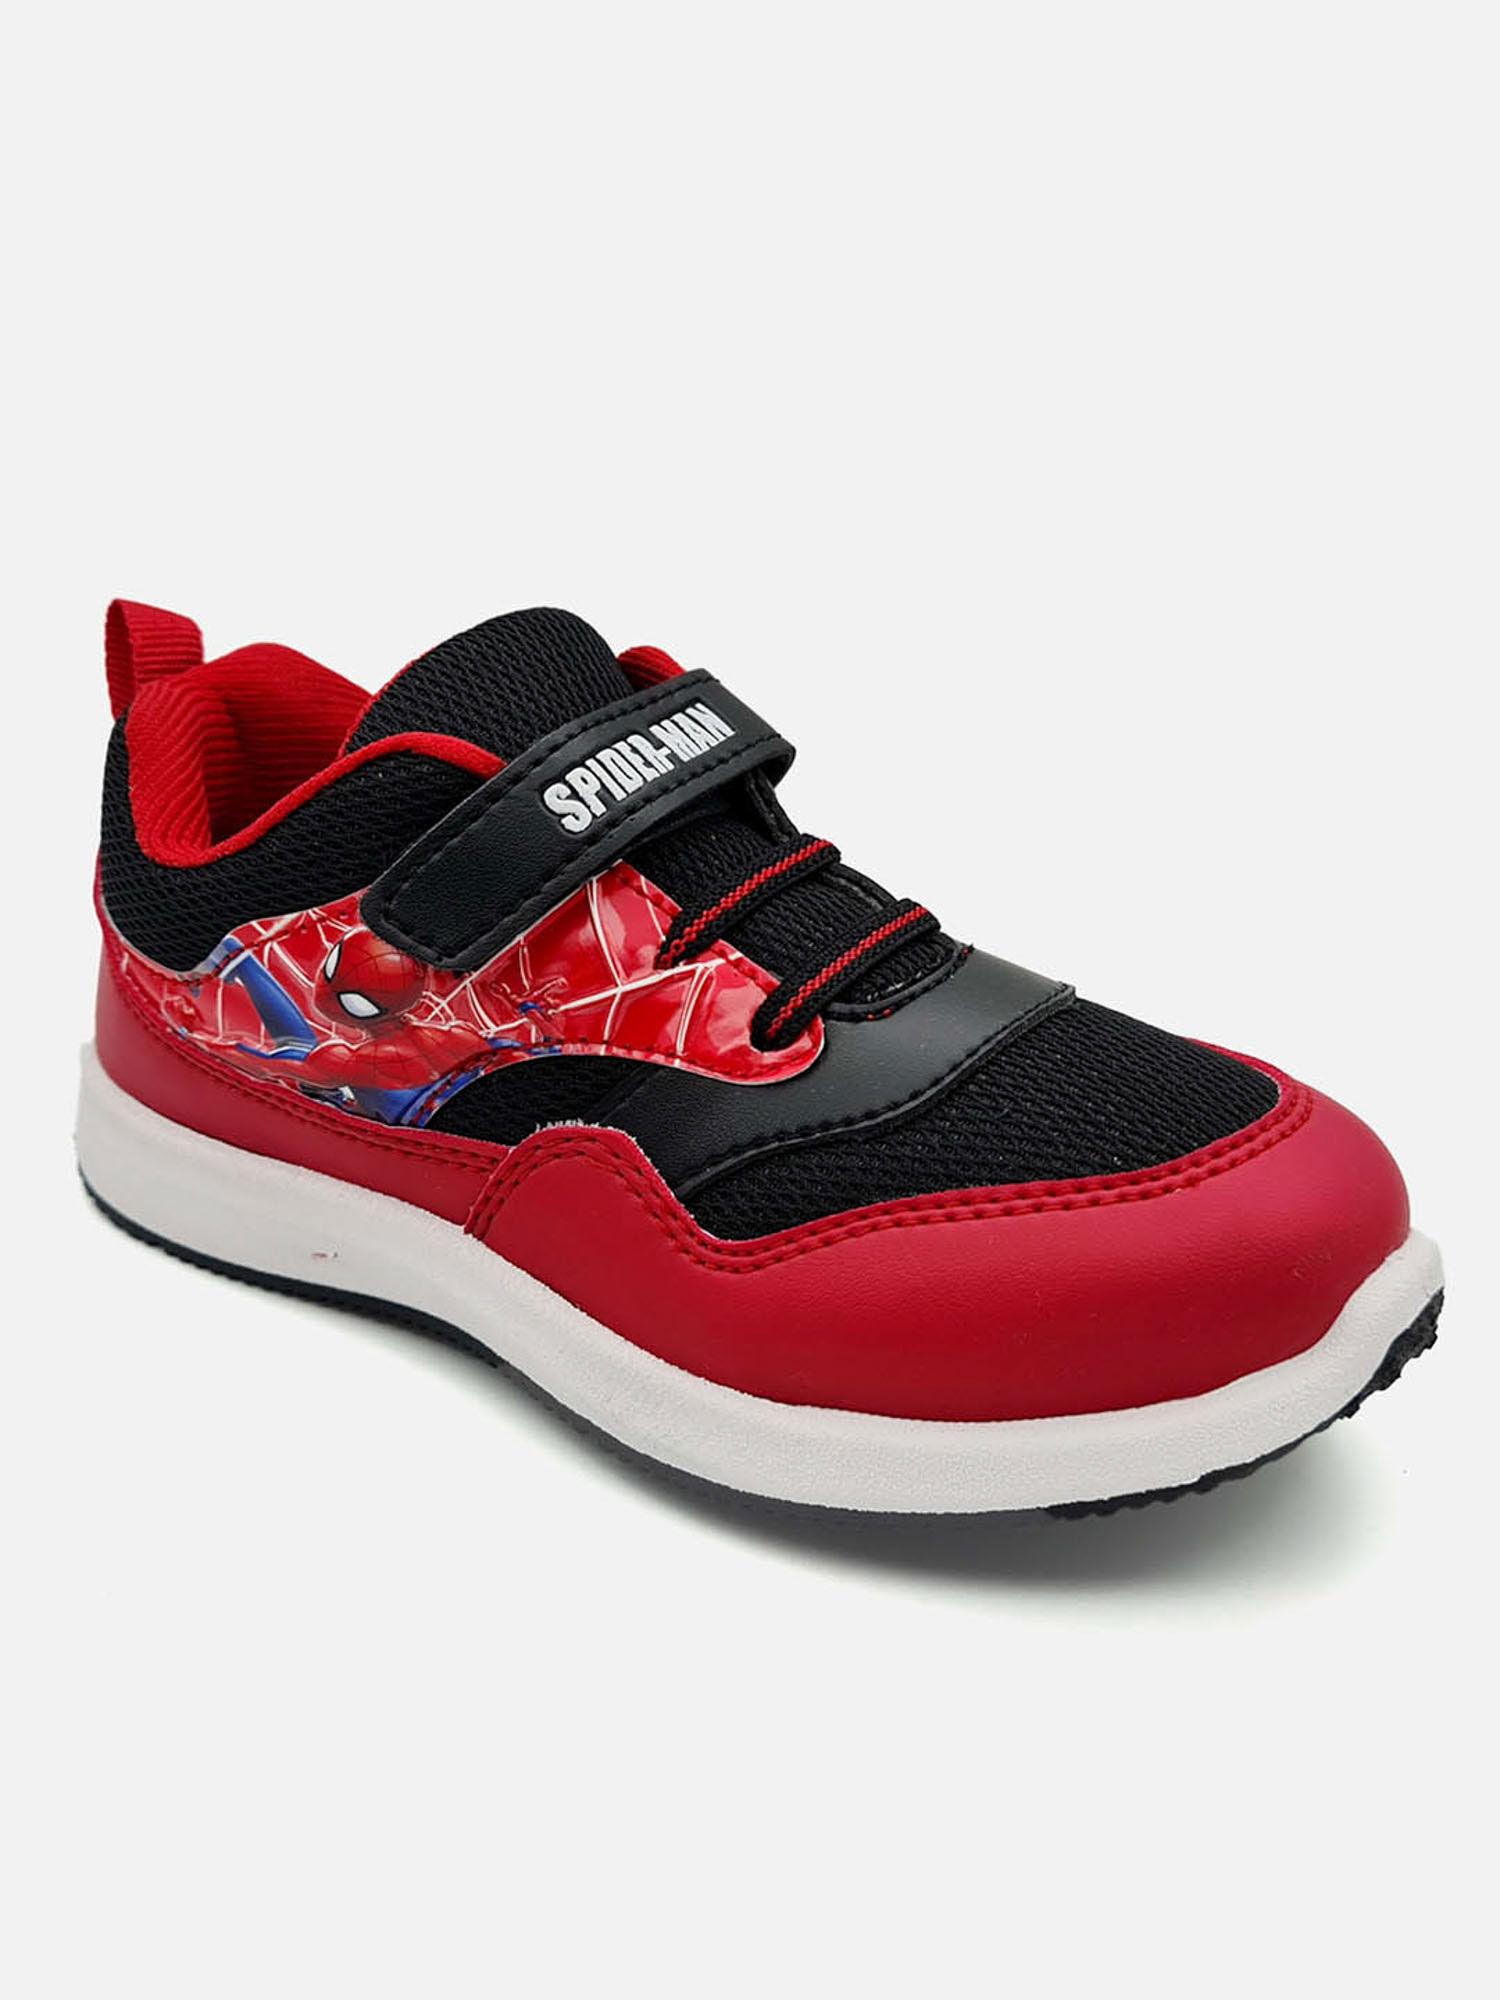 spiderman featured red shoes for boys